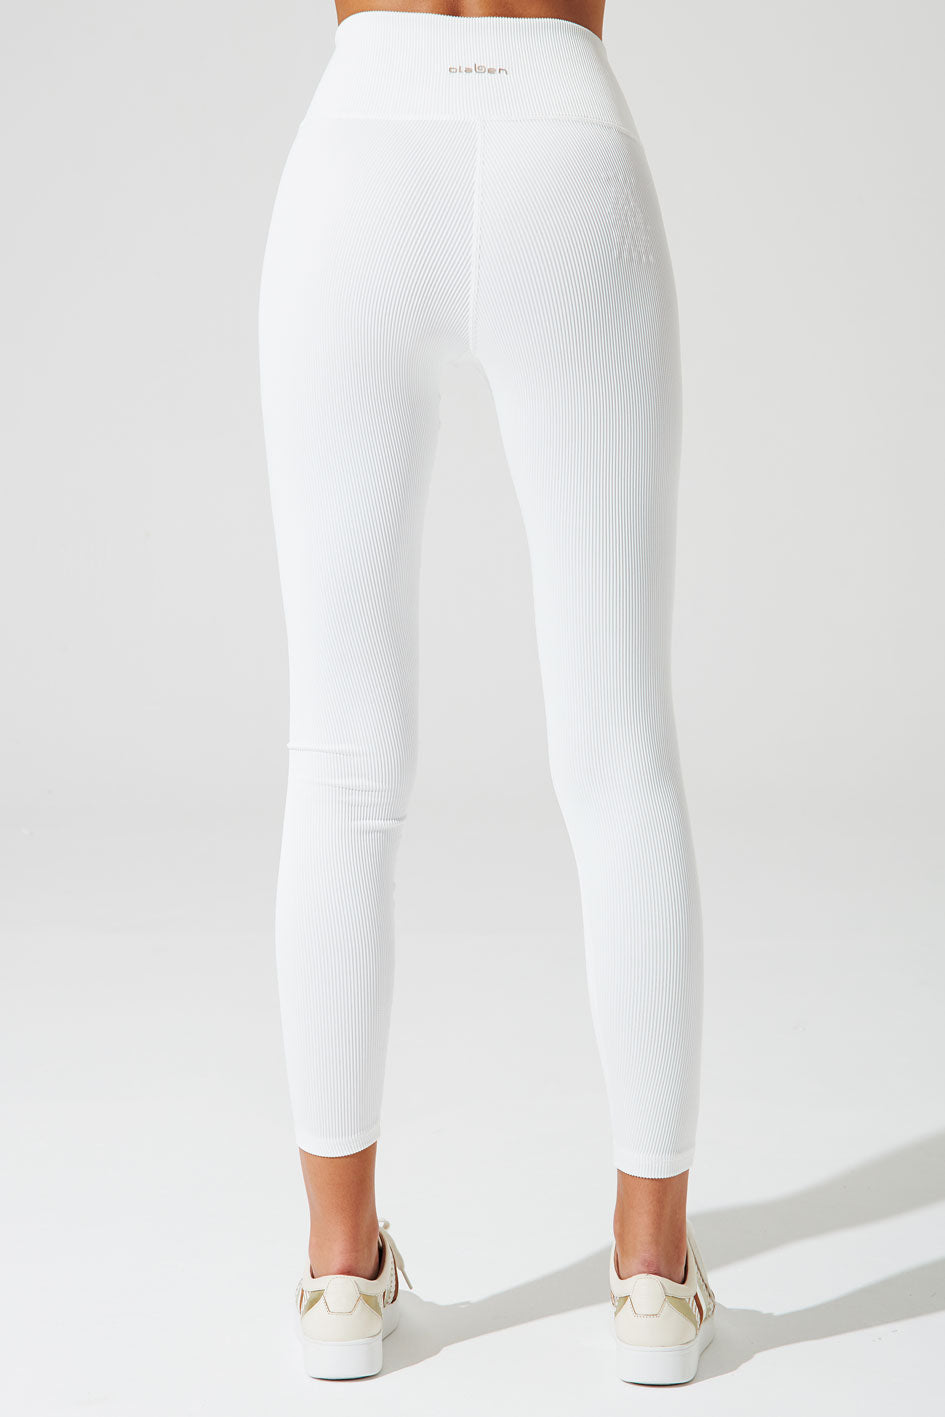 White ribbed leggings for women, size 14, waistband detail, stylish and comfortable.